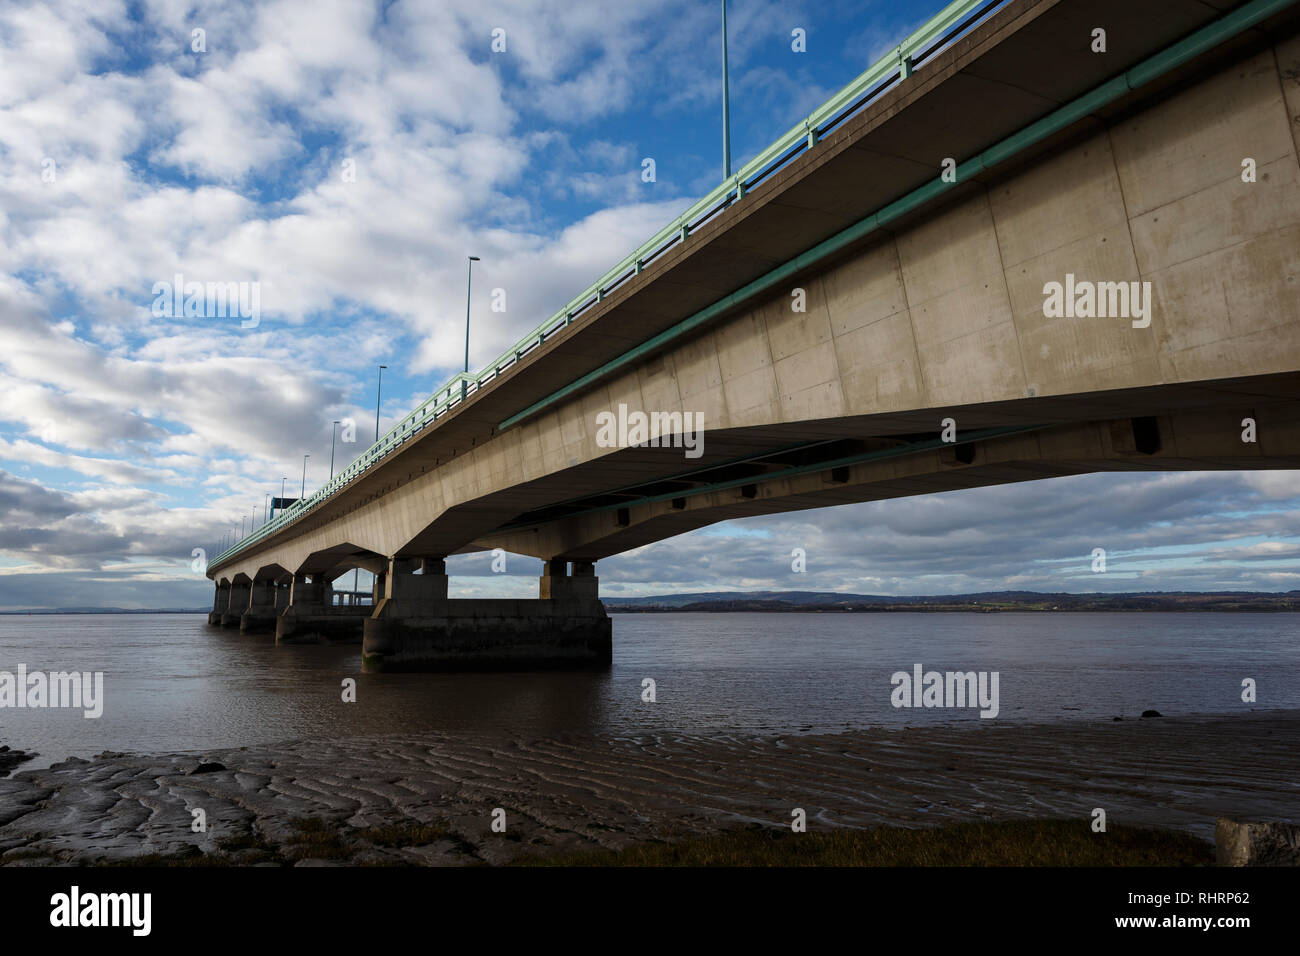 Severn Bridge, also known as the Prince of Wales Bridge, carrying the M4 motorway from Gloucestershire in England to Gwent in Wales Stock Photo